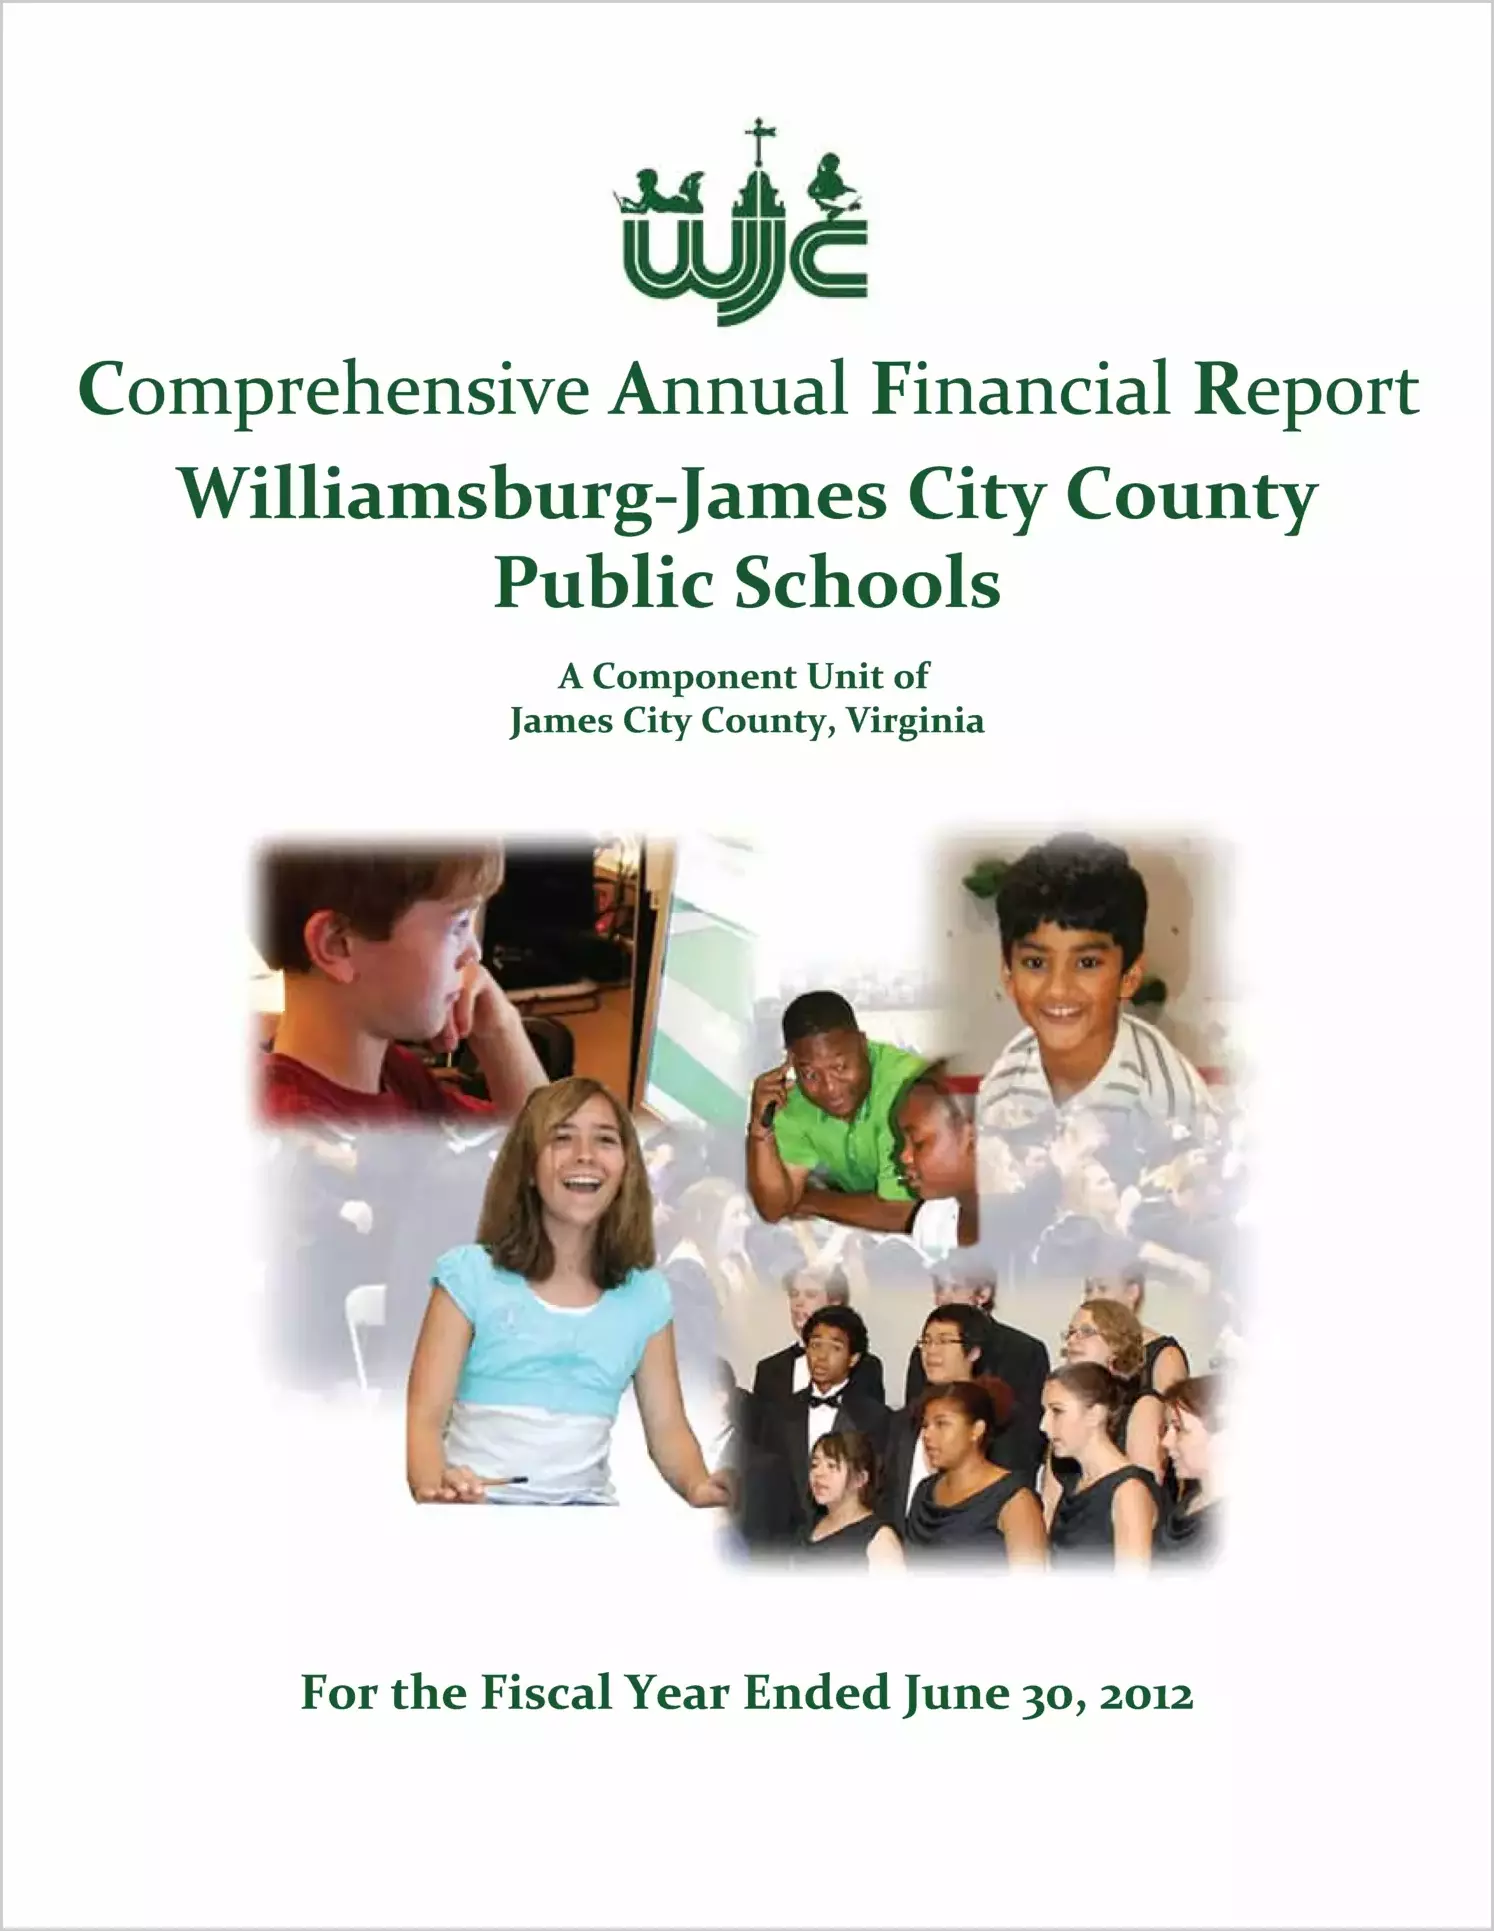 2012 Public Schools Annual Financial Report for County of James City